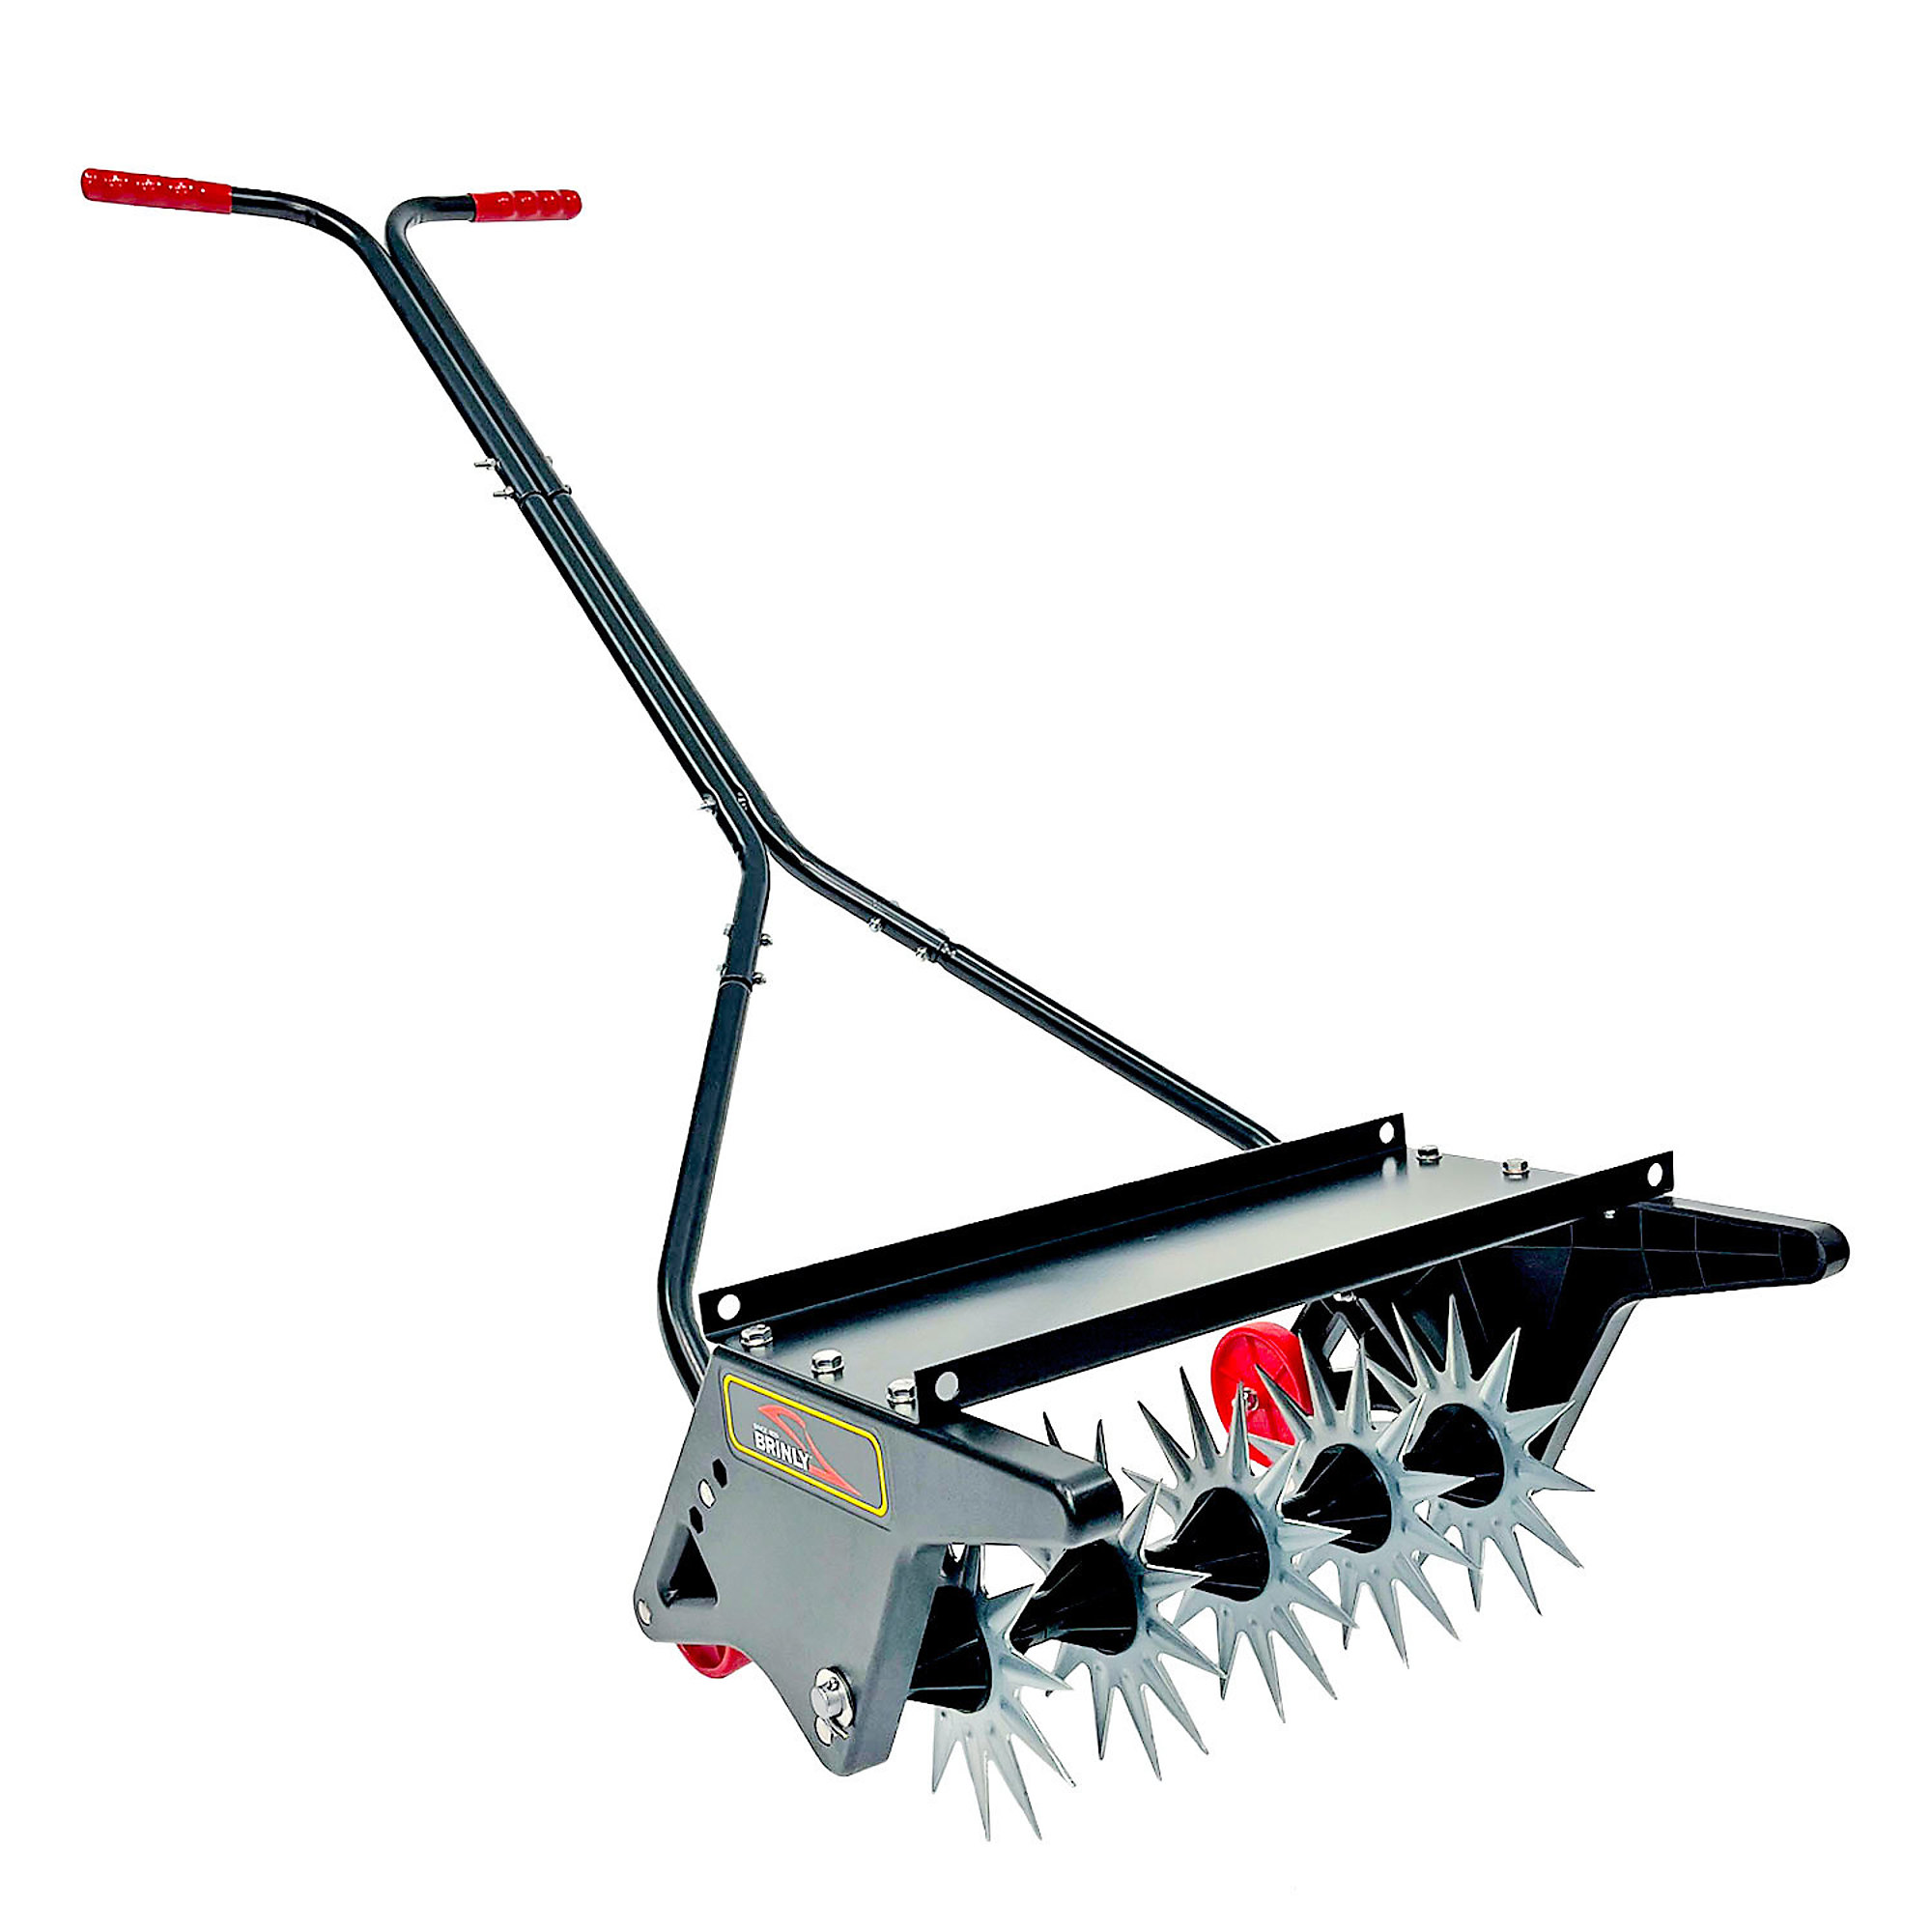 Brinly-Hardy, 18Inch Push Spike Aerator with 3D Galv. Steel Tines, Working Width 18 in, Model PSA-18BH